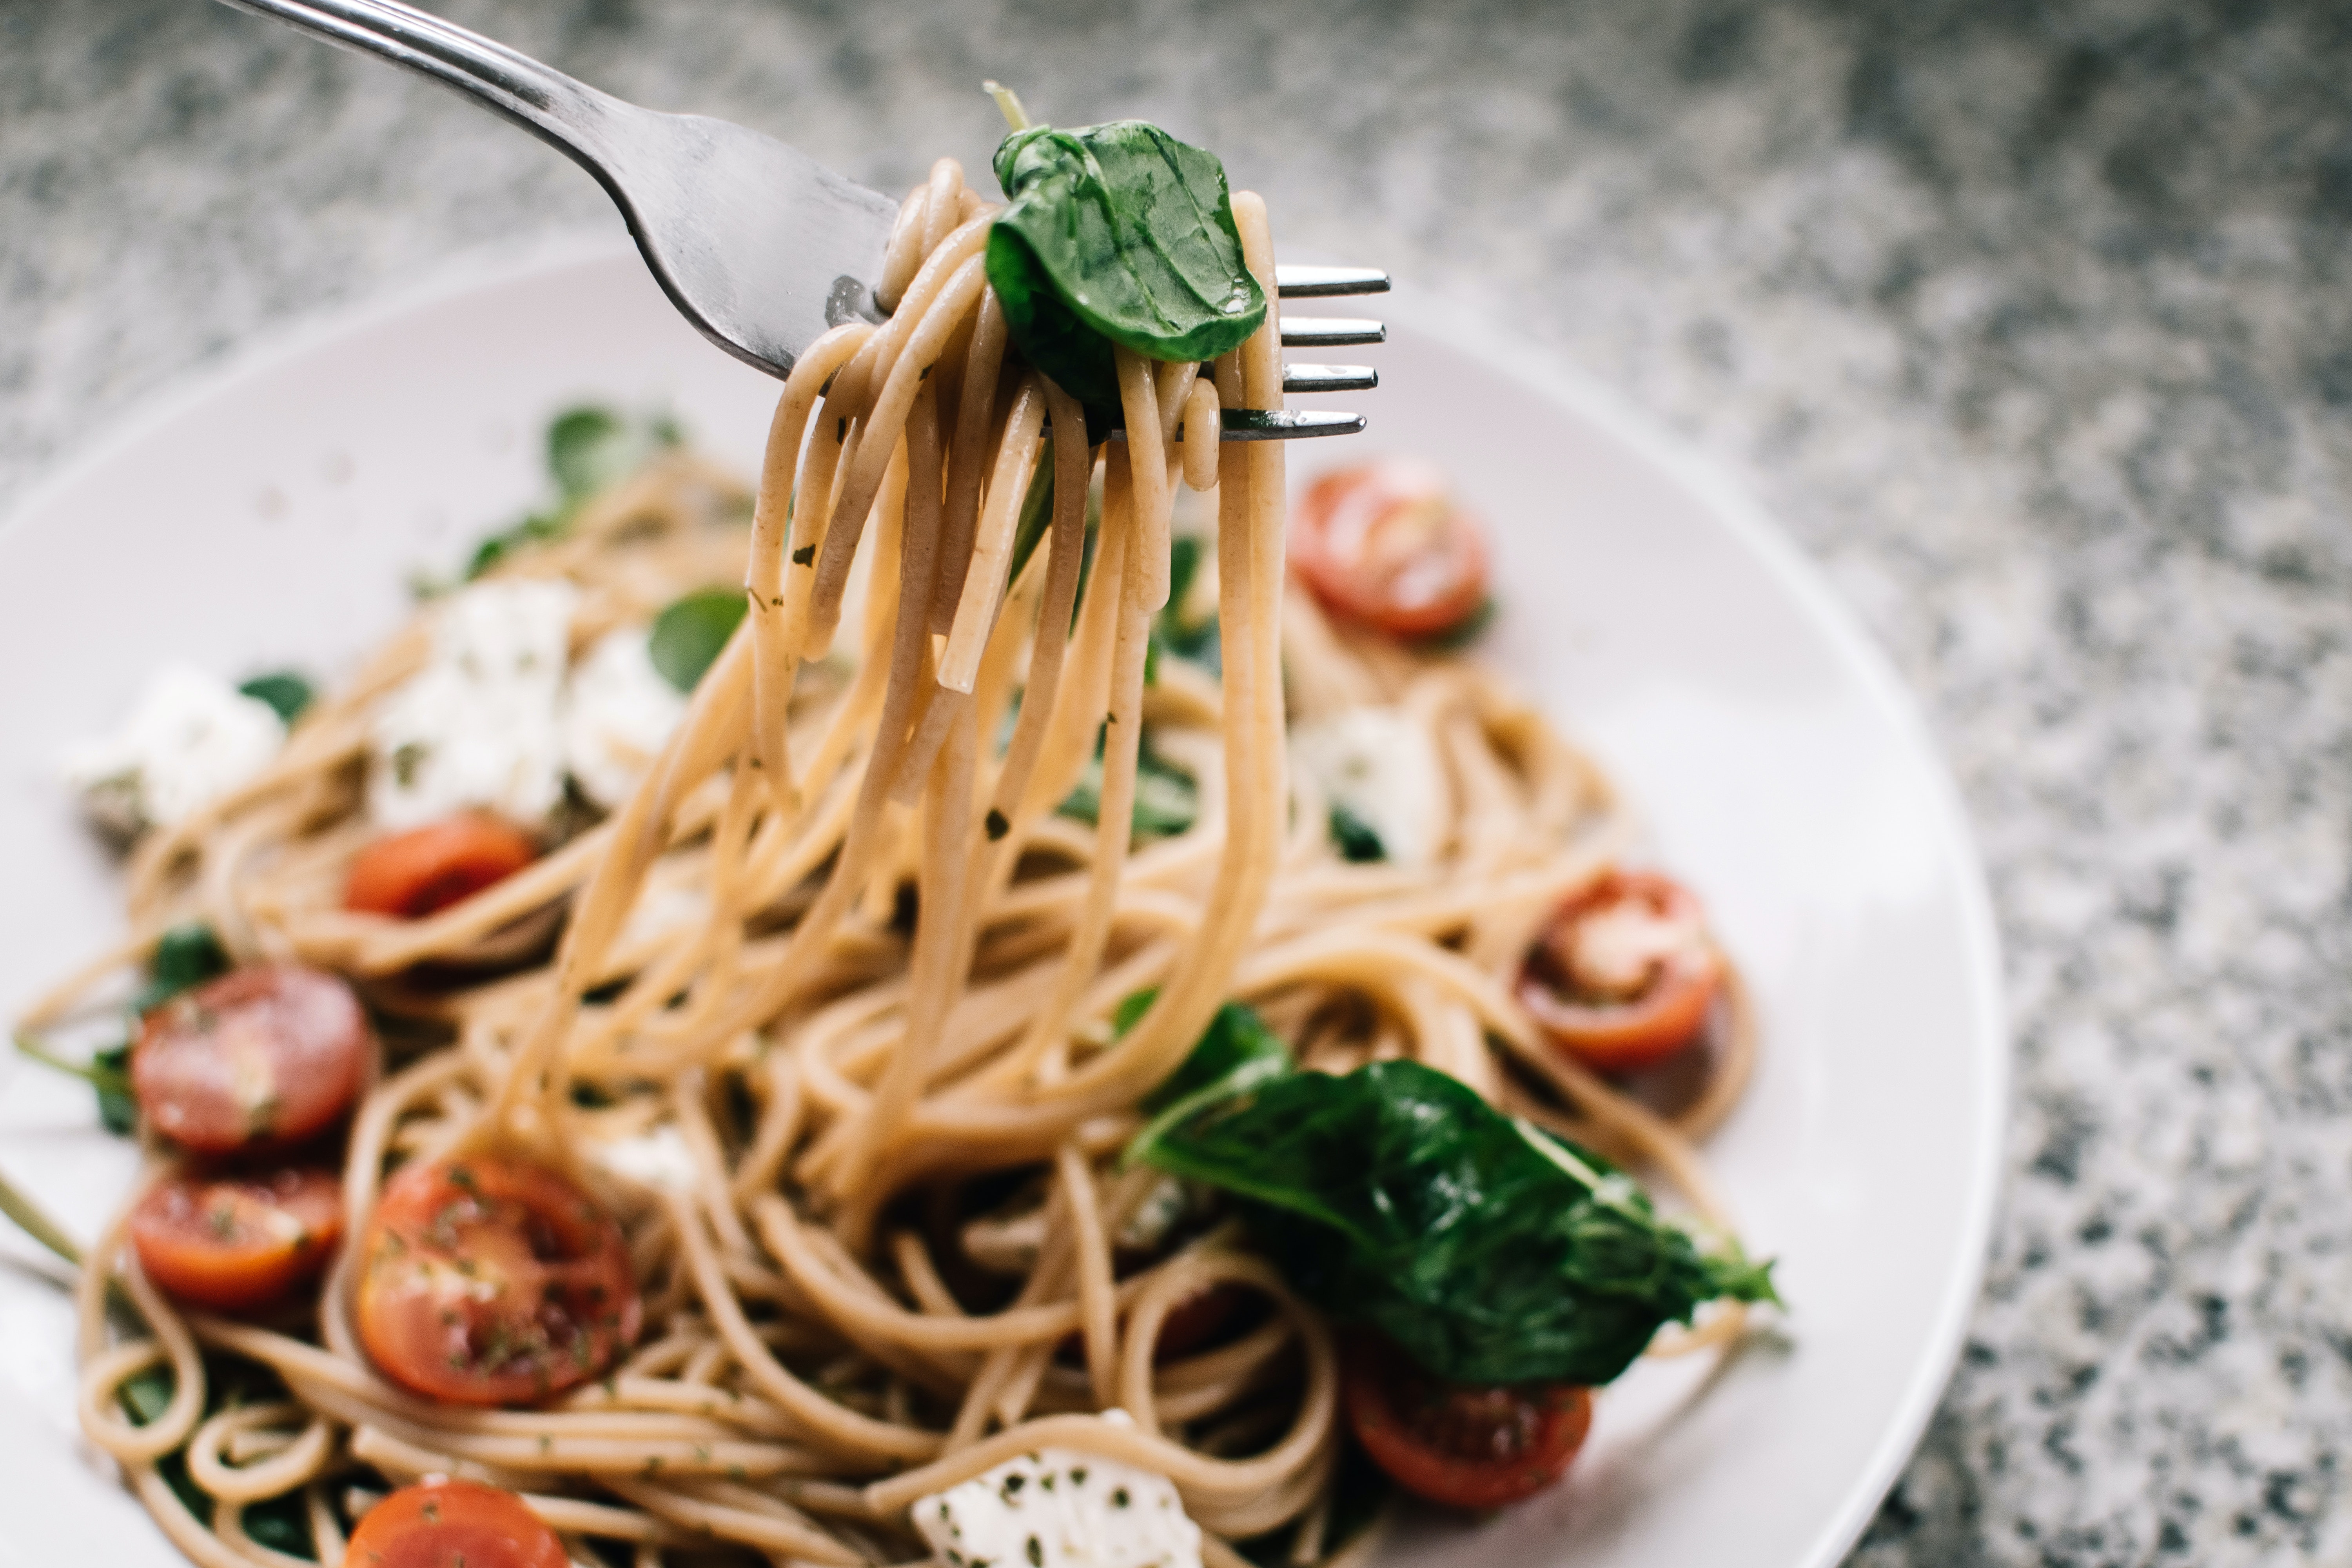 https://www.foodkonjac.com/news/which-pasta-is-best-for-weight-loss/